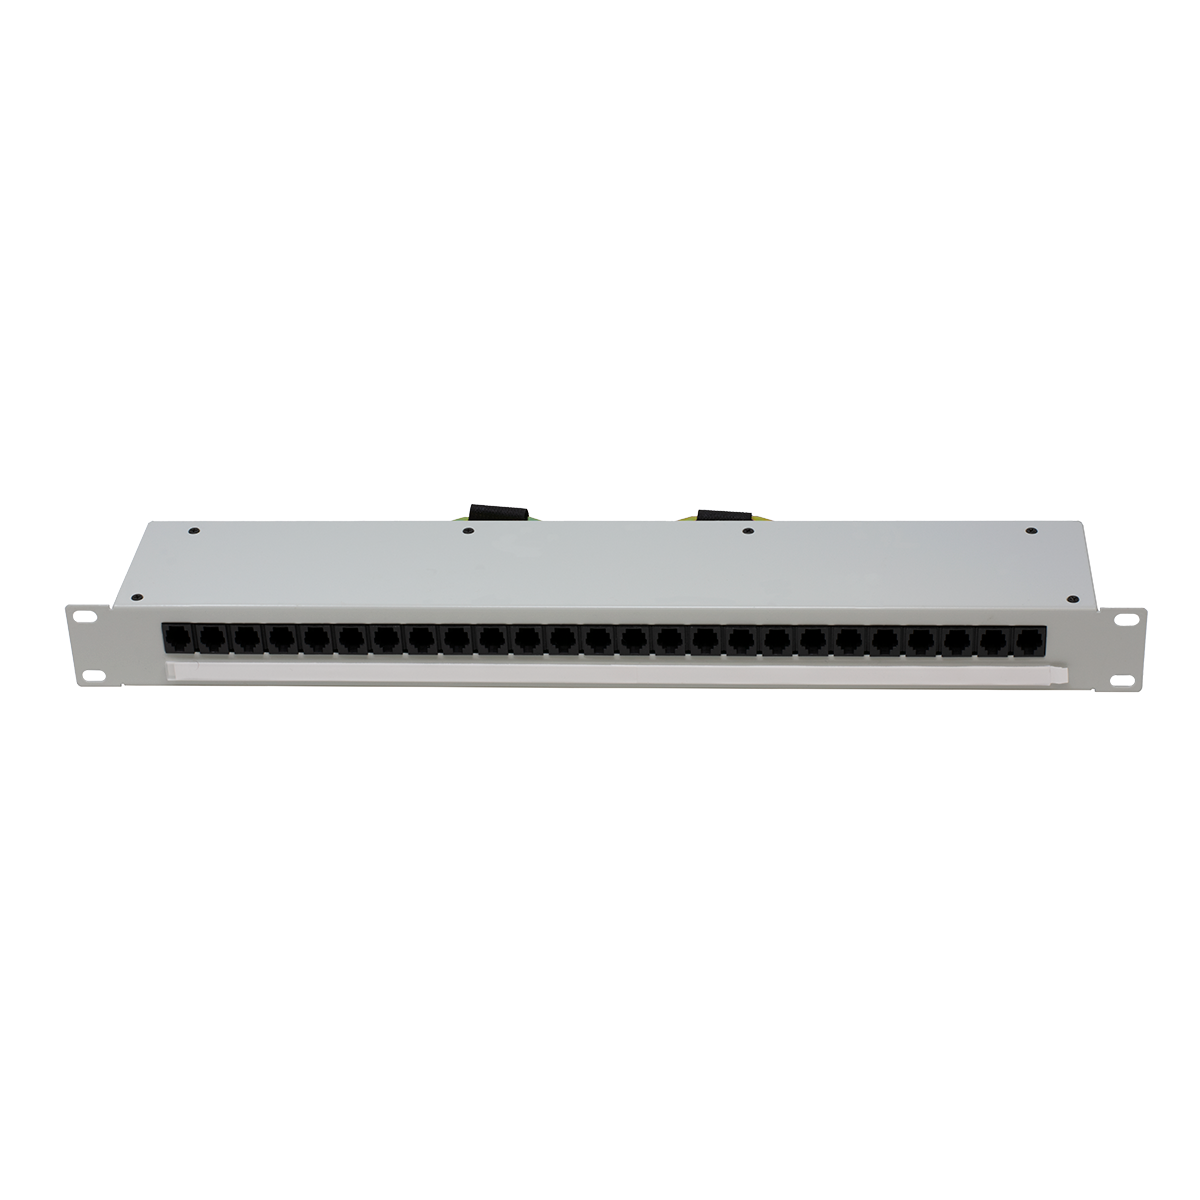 25 Port 1 Pair RJ-45 Patch Panel with Male and Female Amp (Front View)